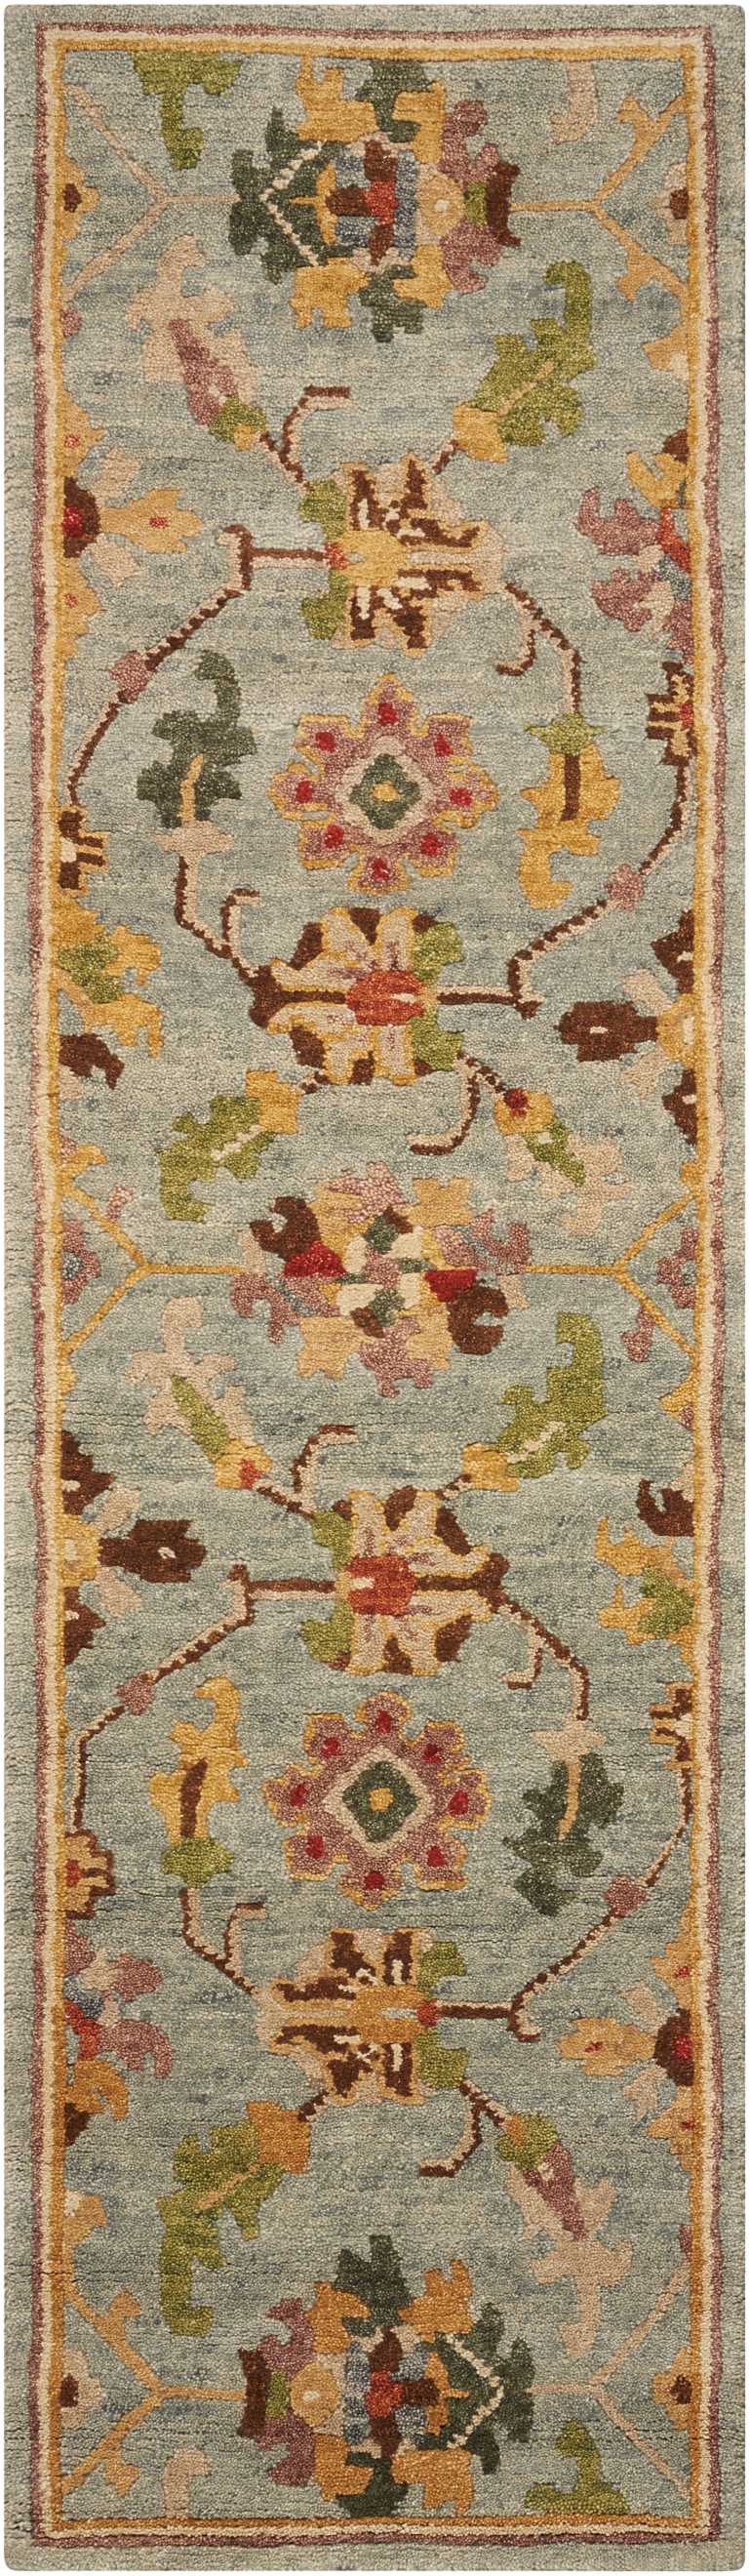 Nourison Home Tahoe TA13 Seaglass Traditional Knotted Rug